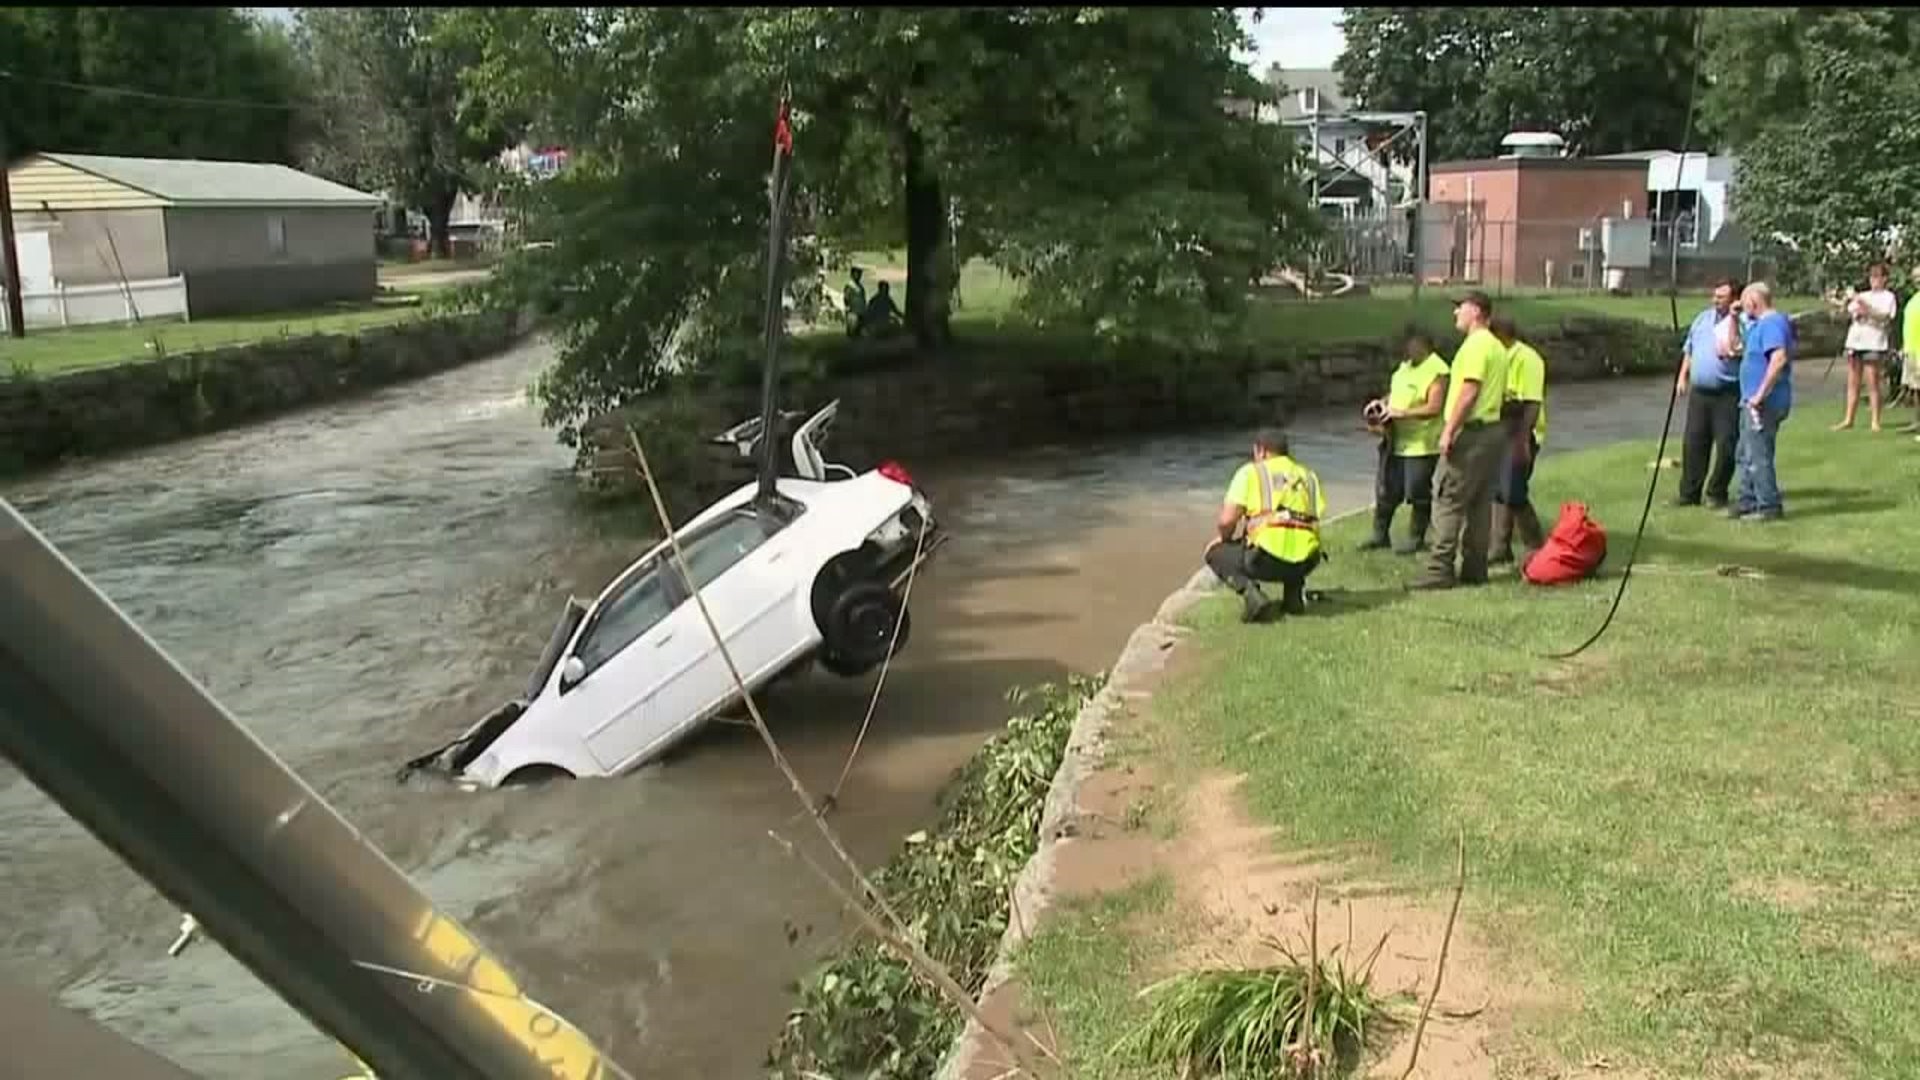 Another Round of Flash Flooding in Tremont